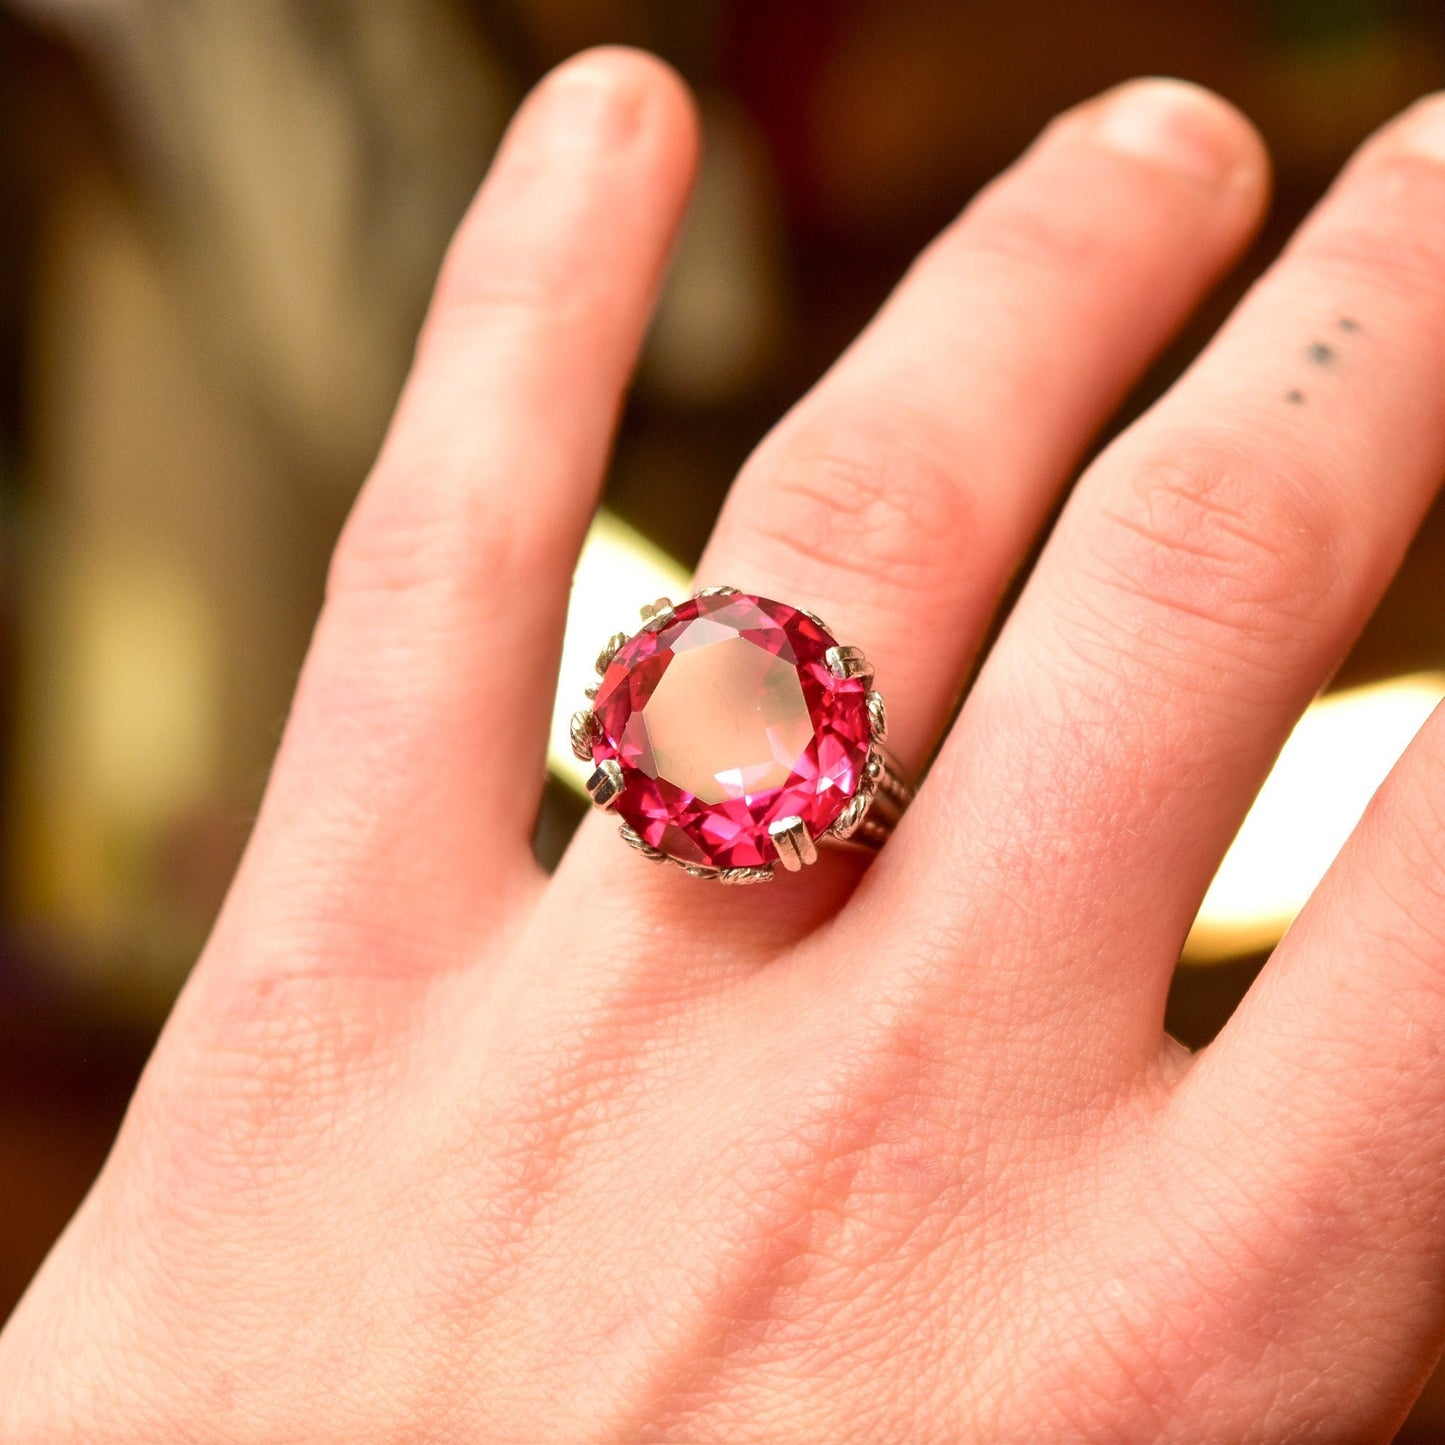 10K white gold pink ruby cocktail ring with ornate filigree setting on a hand, featuring a large round synthetic ruby gemstone, in Art Deco style, size 6 3/4 US.